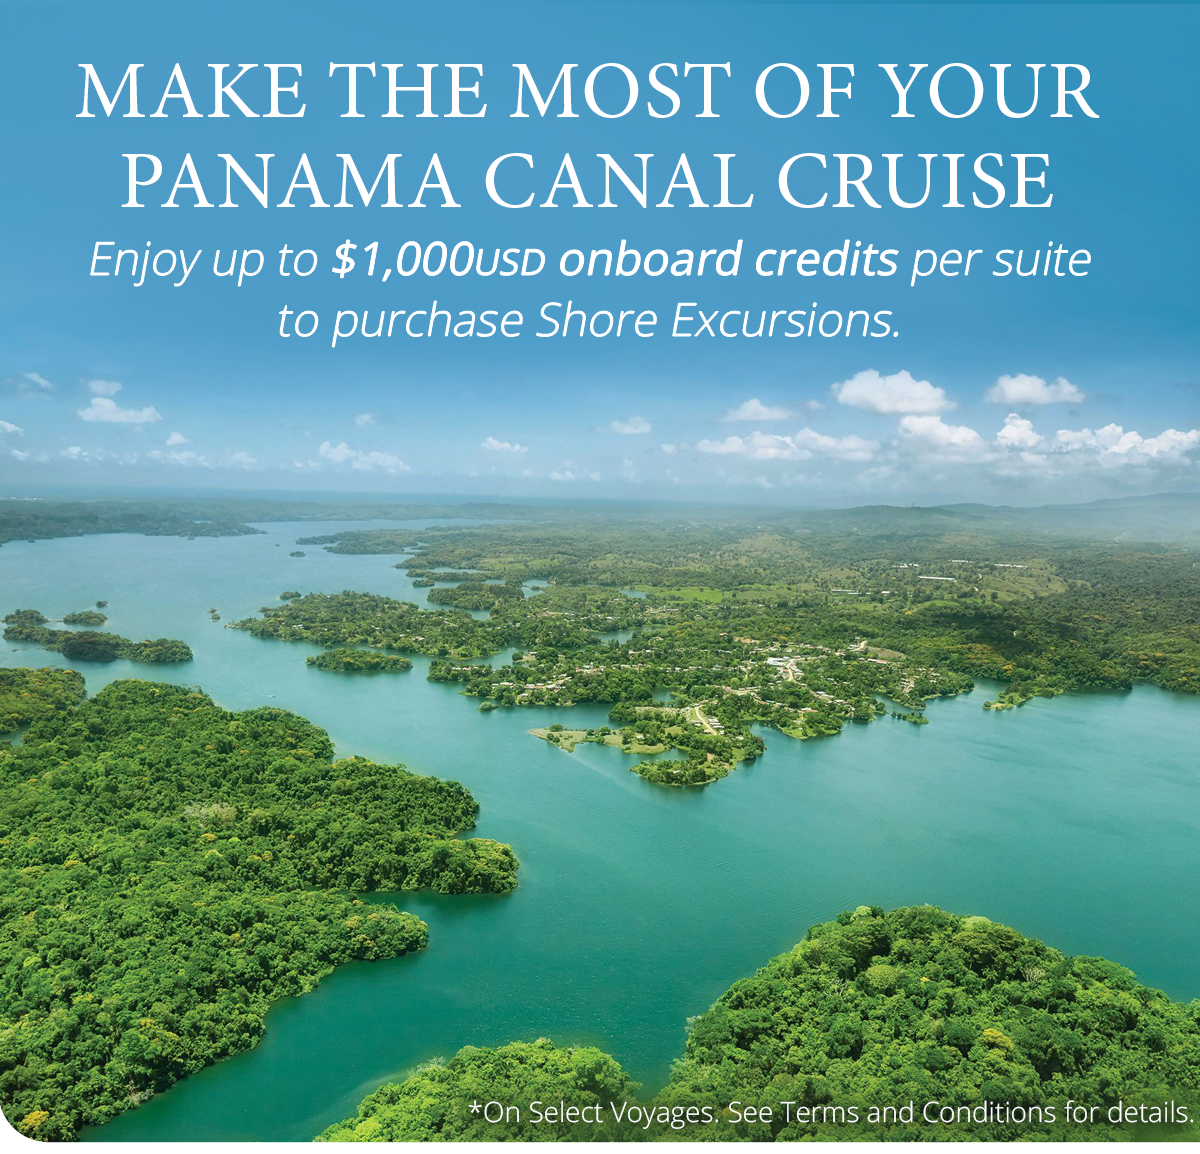 Make the most of your                                              Panama Canal Cruise with up                                              to $1,000USD onboard credits                                              per suite to purchase Shore                                              Excursions..